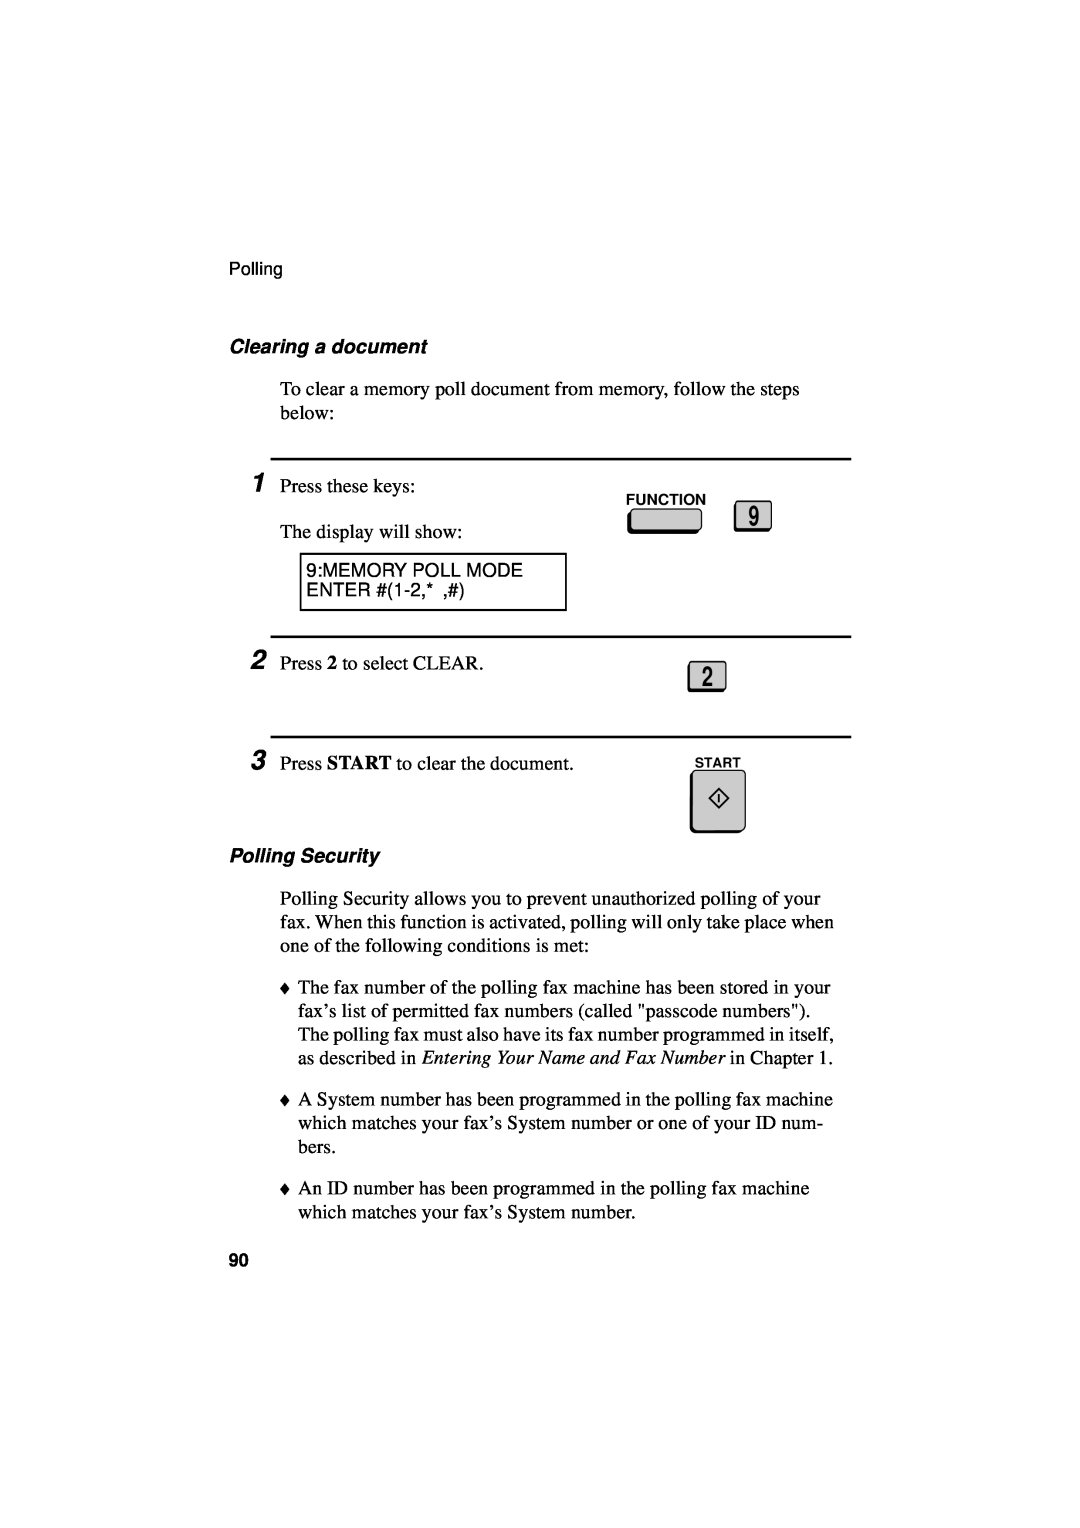 Sharp FO-5550, FO-5700, FO-4700 operation manual Clearing a document, Polling Security 